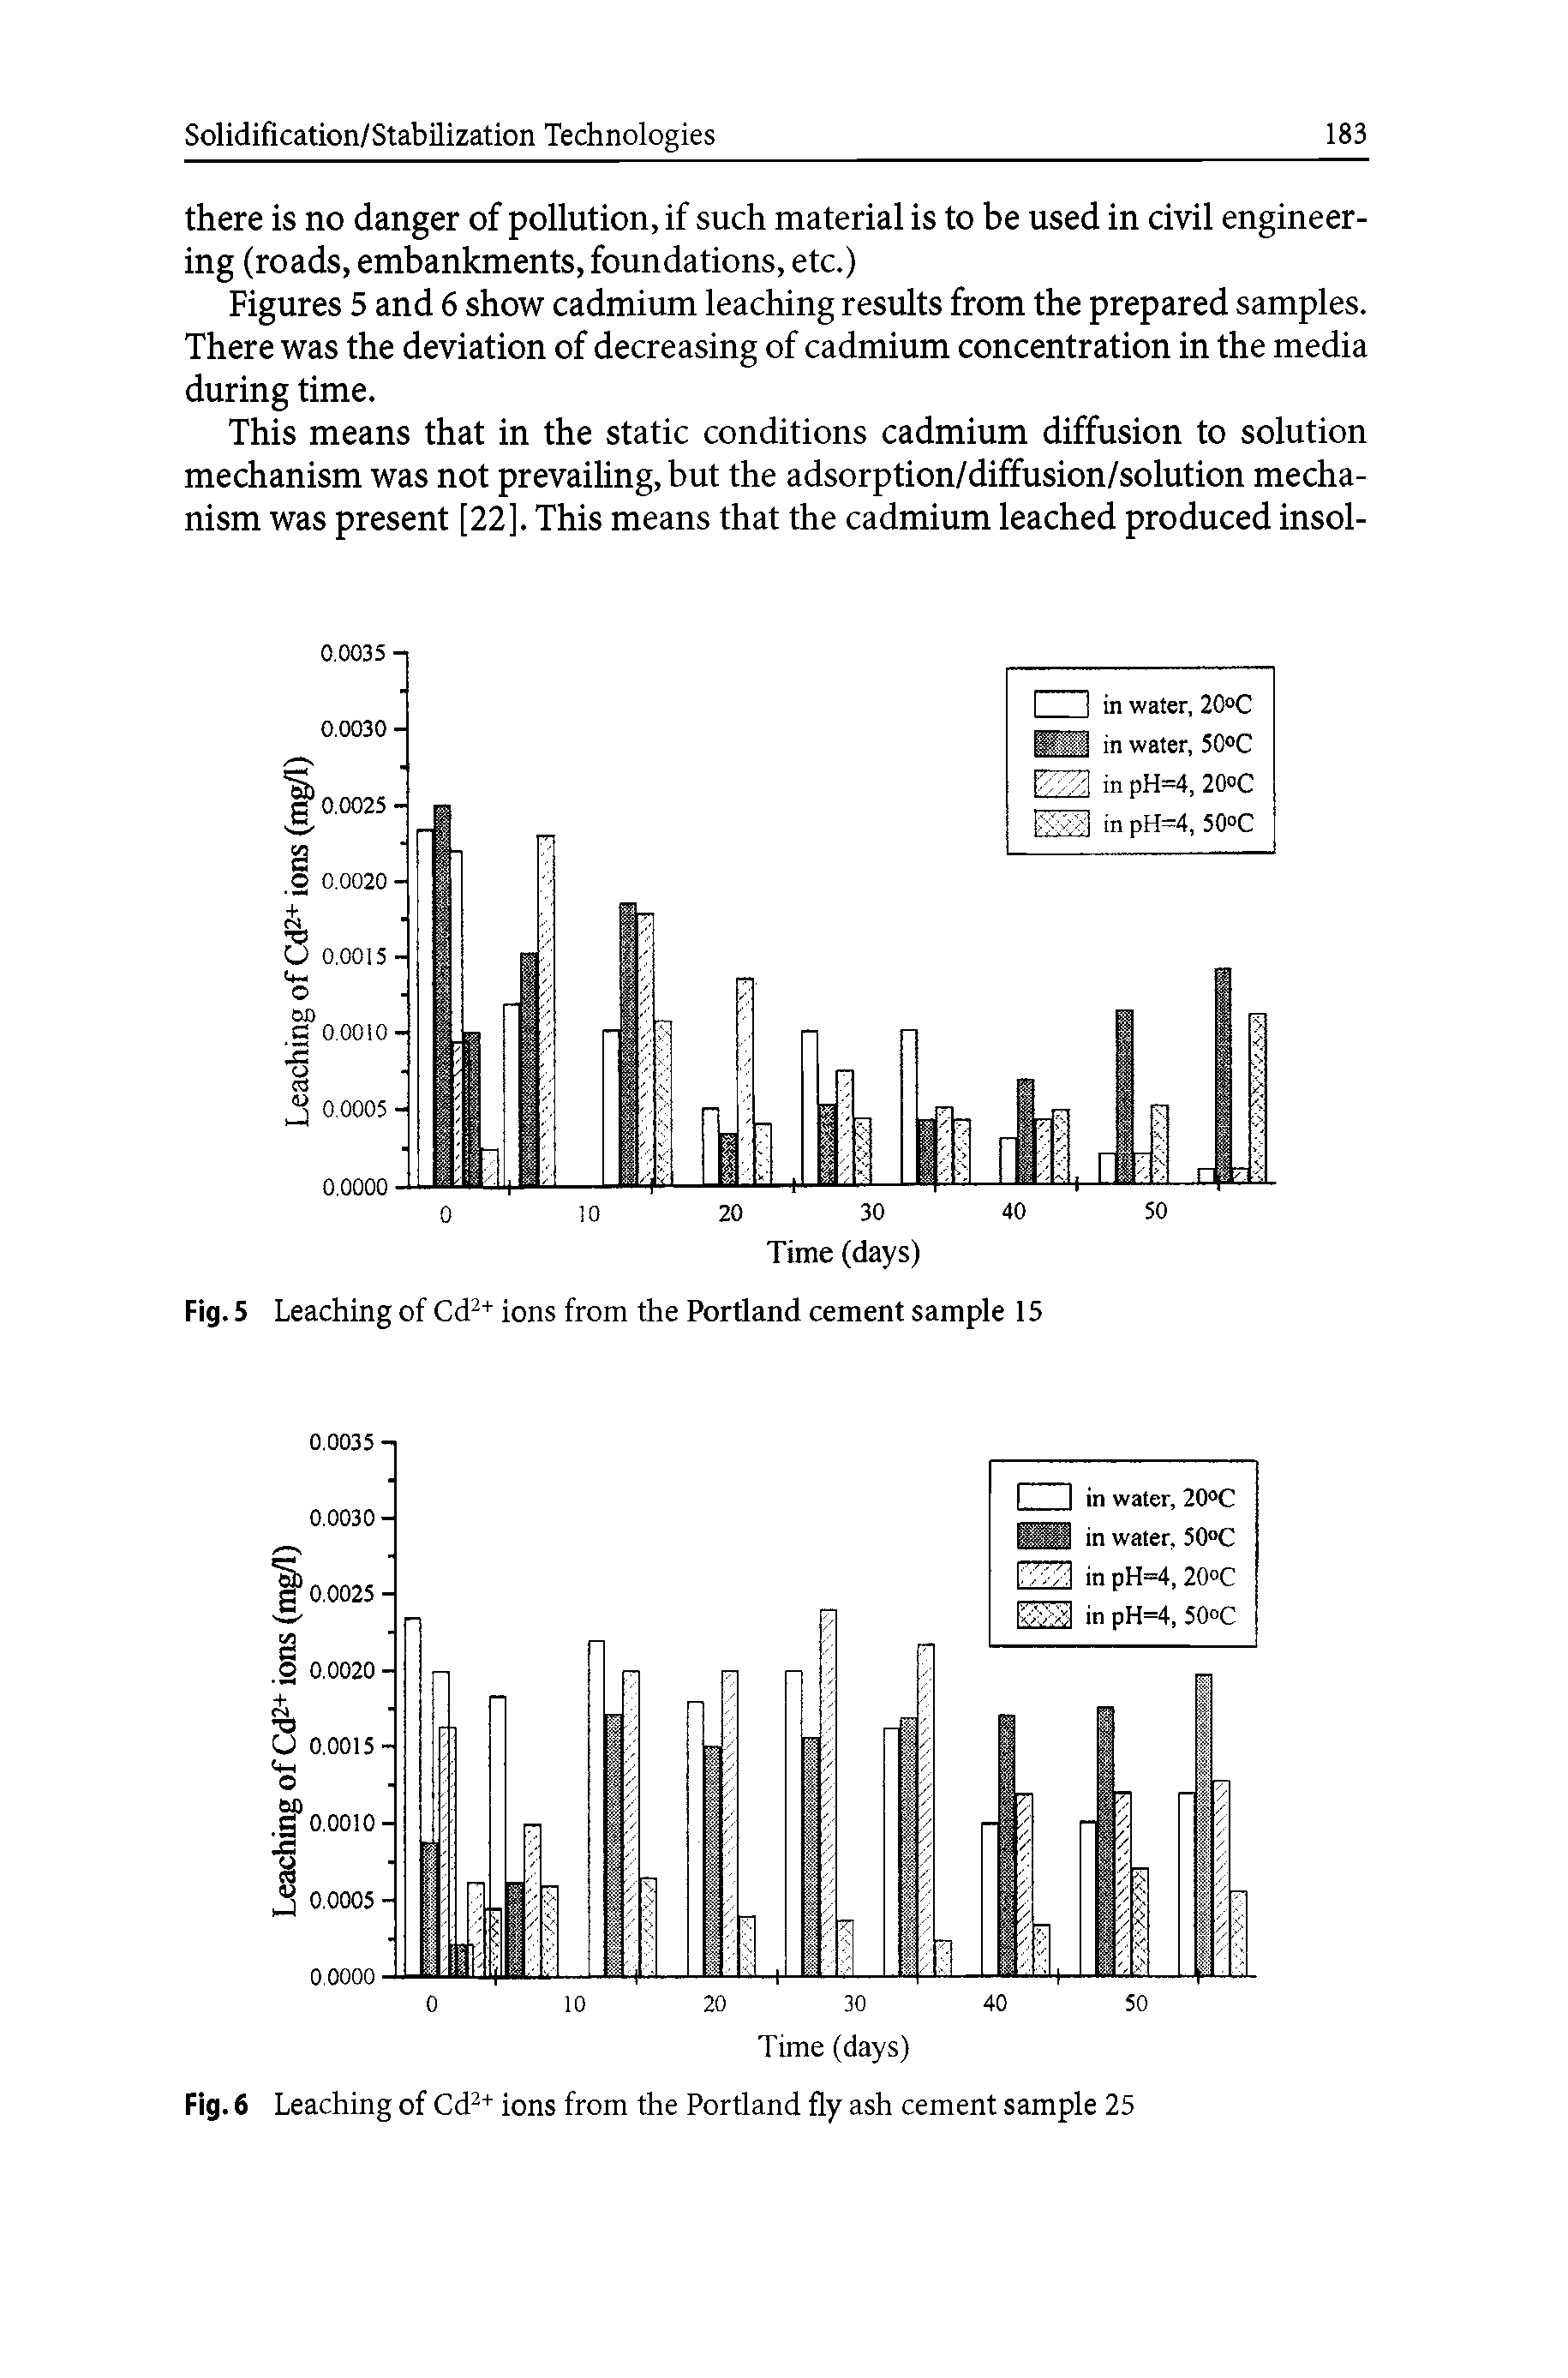 Figures 5 and 6 show cadmium leaching results from the prepared samples. There was the deviation of decreasing of cadmium concentration in the media during time.